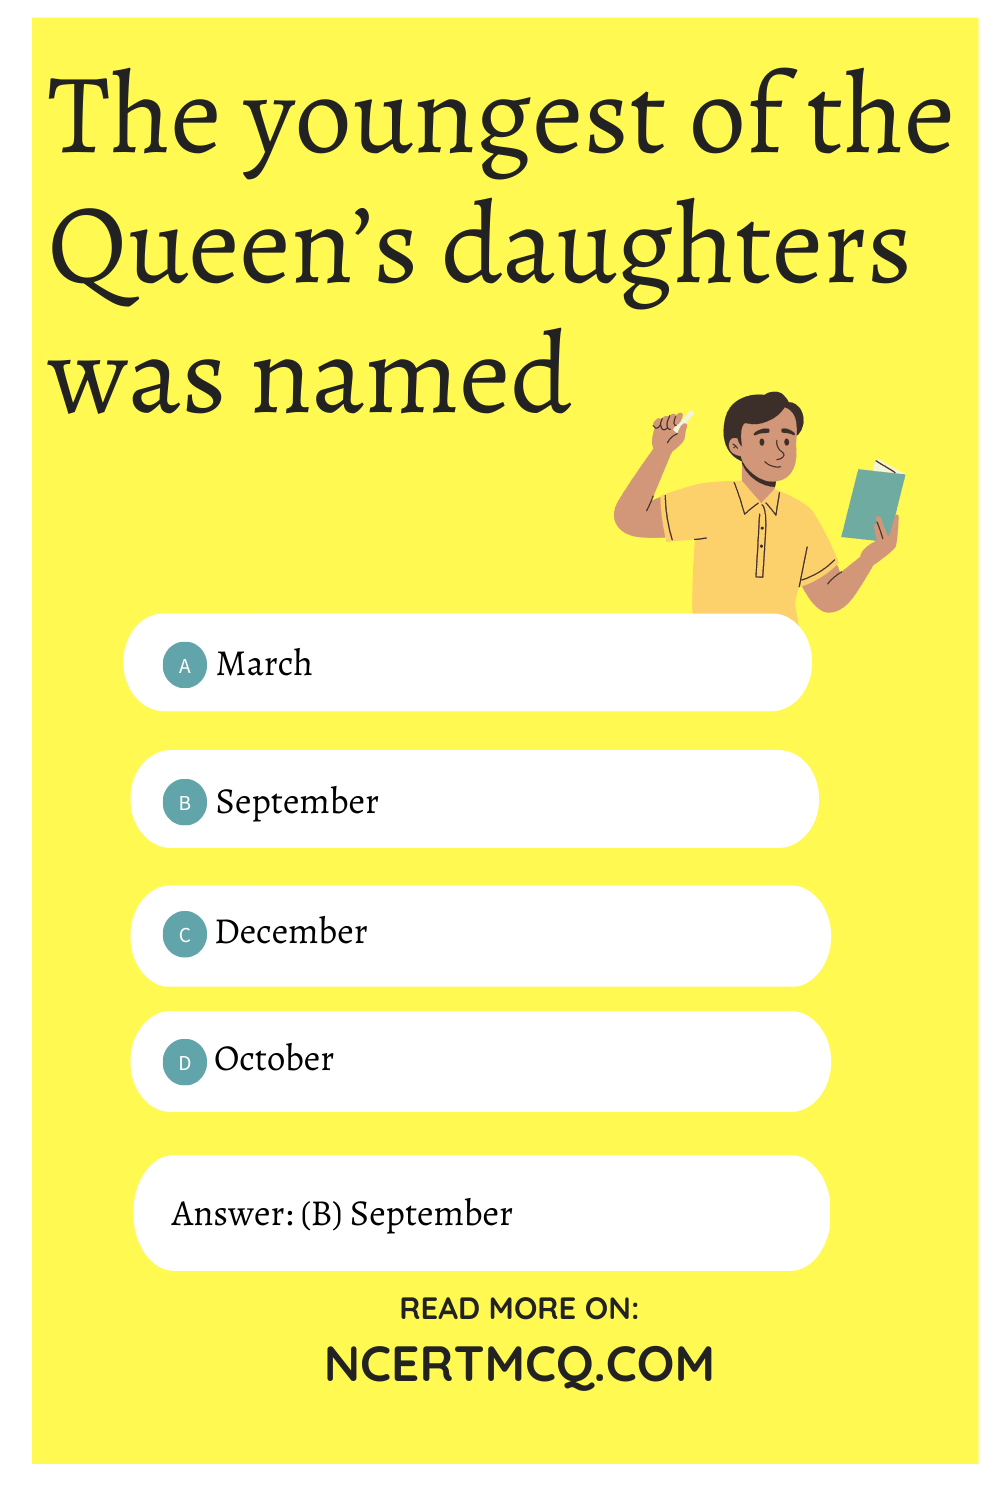 The youngest of the Queen’s daughters was named